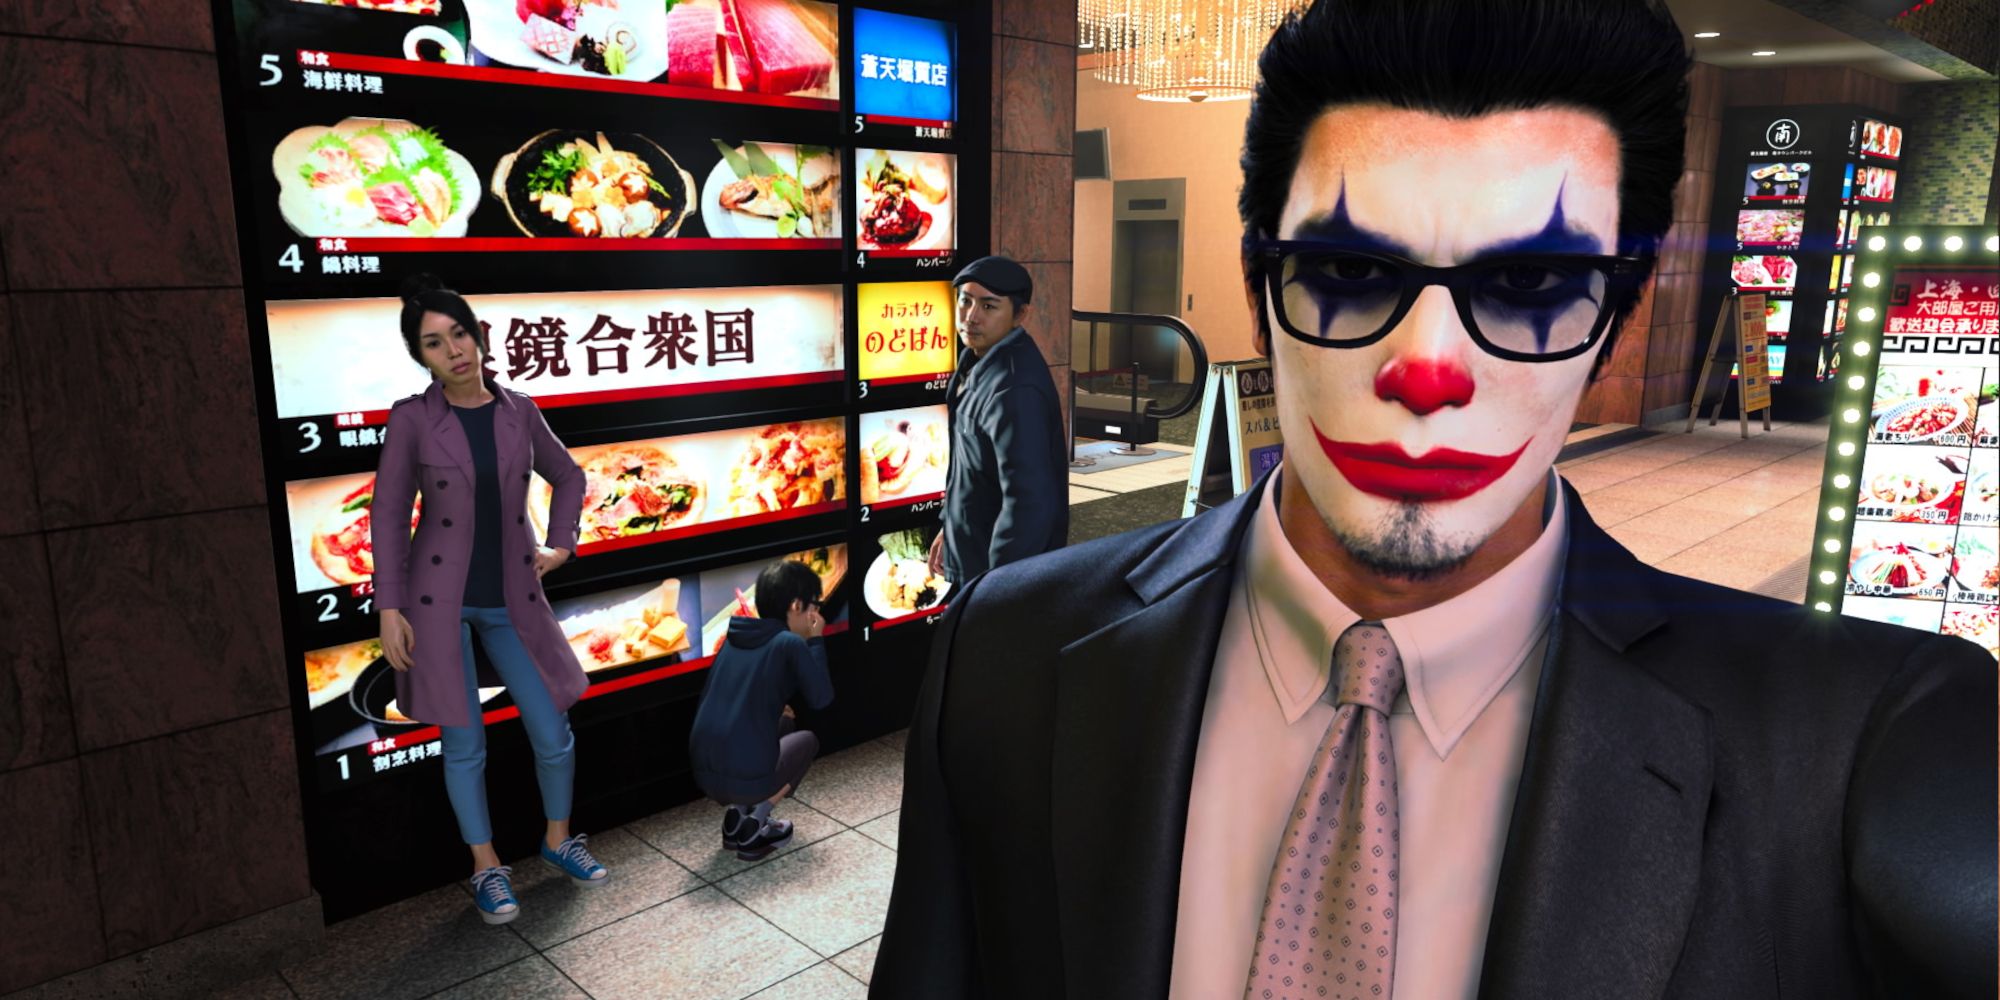 like a dragon gaiden turn that frown upside down clown kiryu taking a selfie with a family while wearing clown makeup